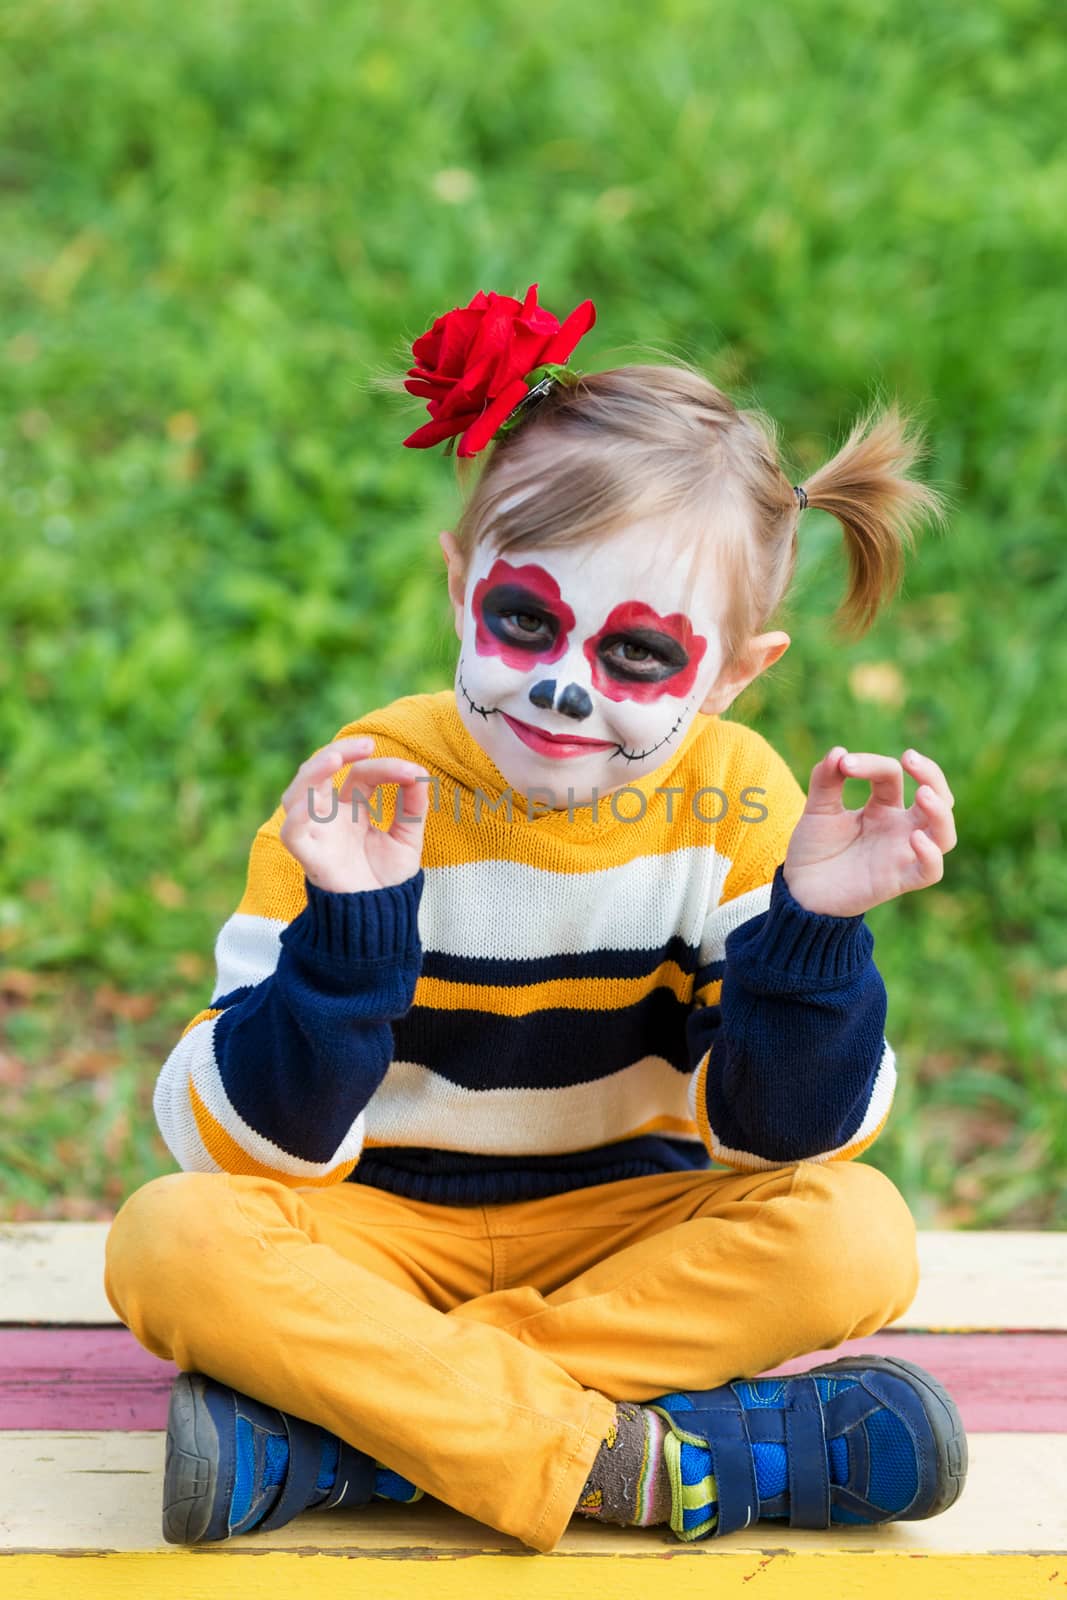 A little preschool girl with Painted Face, sitting on a bench in lotus position on the playground, celebrates Halloween or Mexican Day of the Dead.